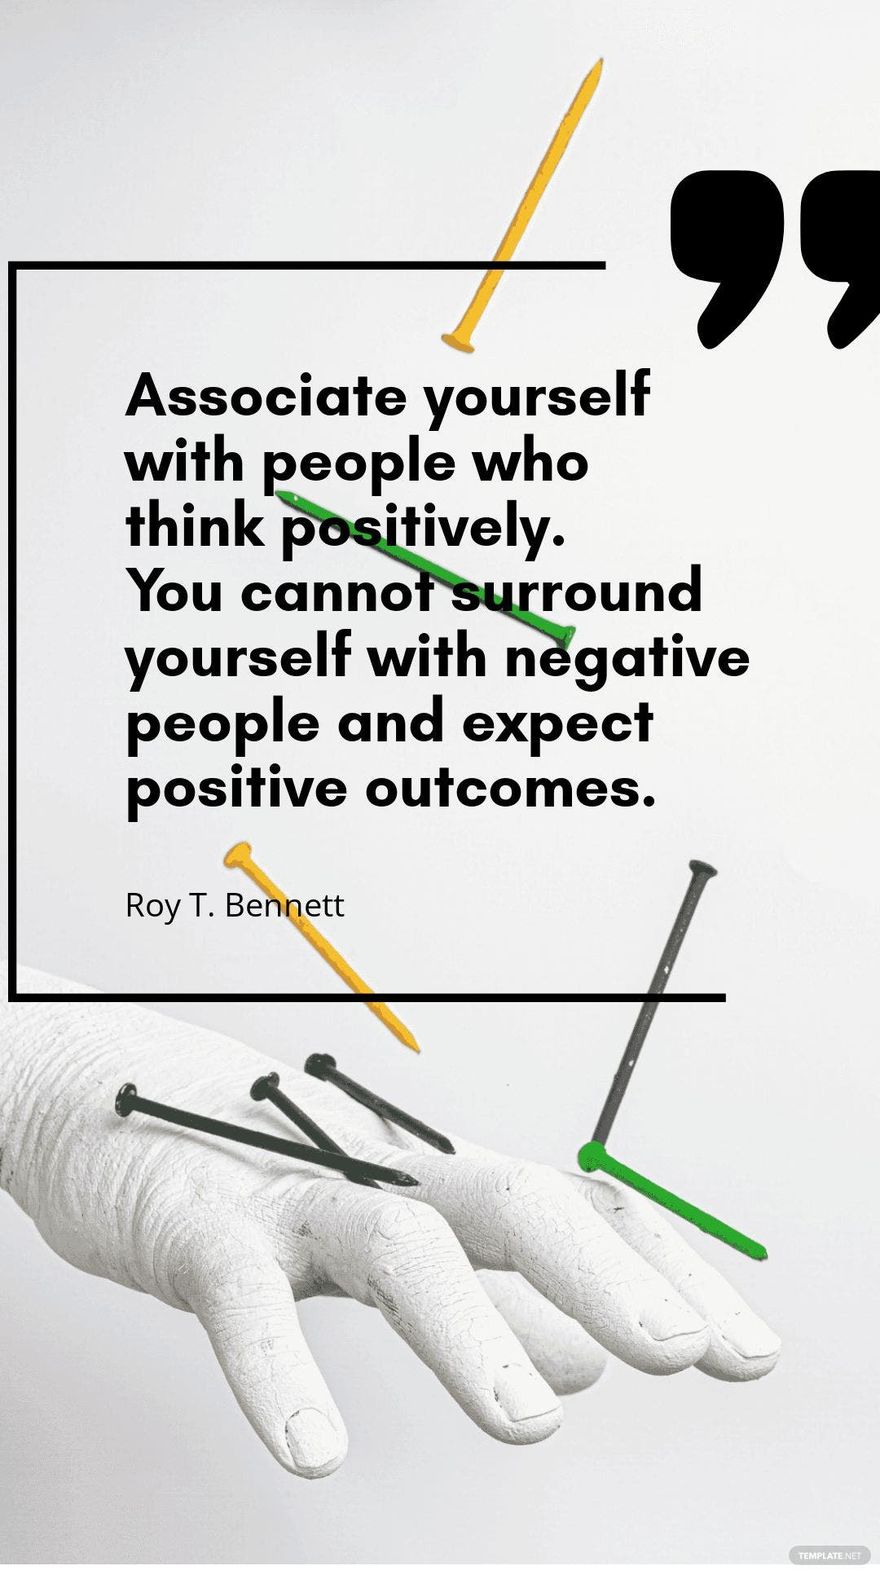 Roy T. Bennett - Associate yourself with people who think positively. You cannot surround yourself with negative people and expect positive outcomes.